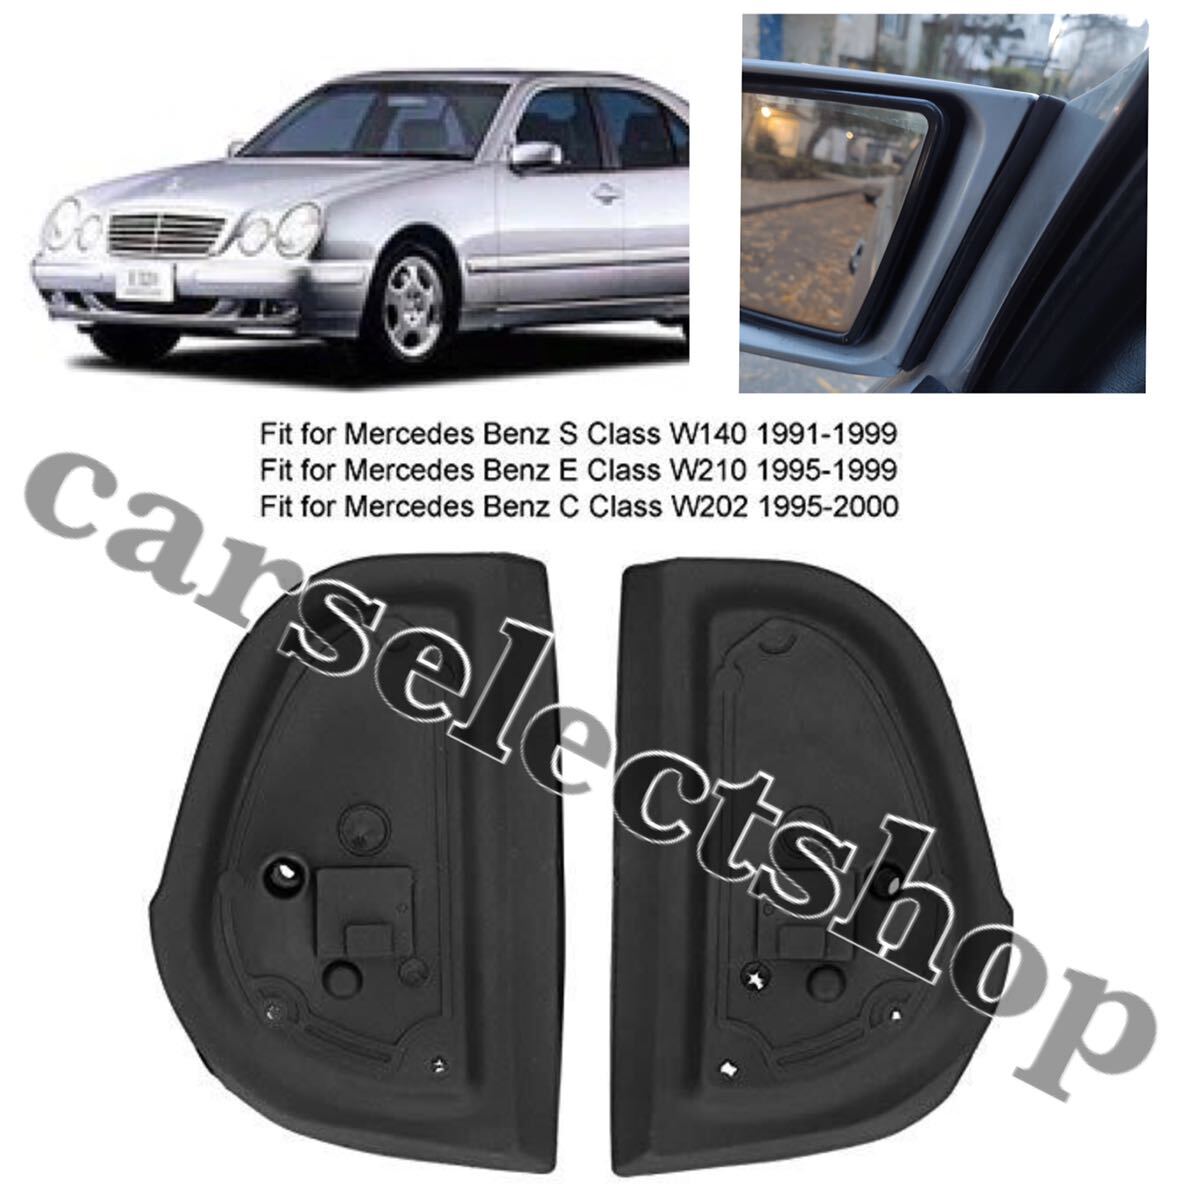  immediate payment * postage included * Mercedes Benz Benz door mirror gasket Raver rubber left right W140/W210/W202[S Class /E Class /C Class ] repair also *